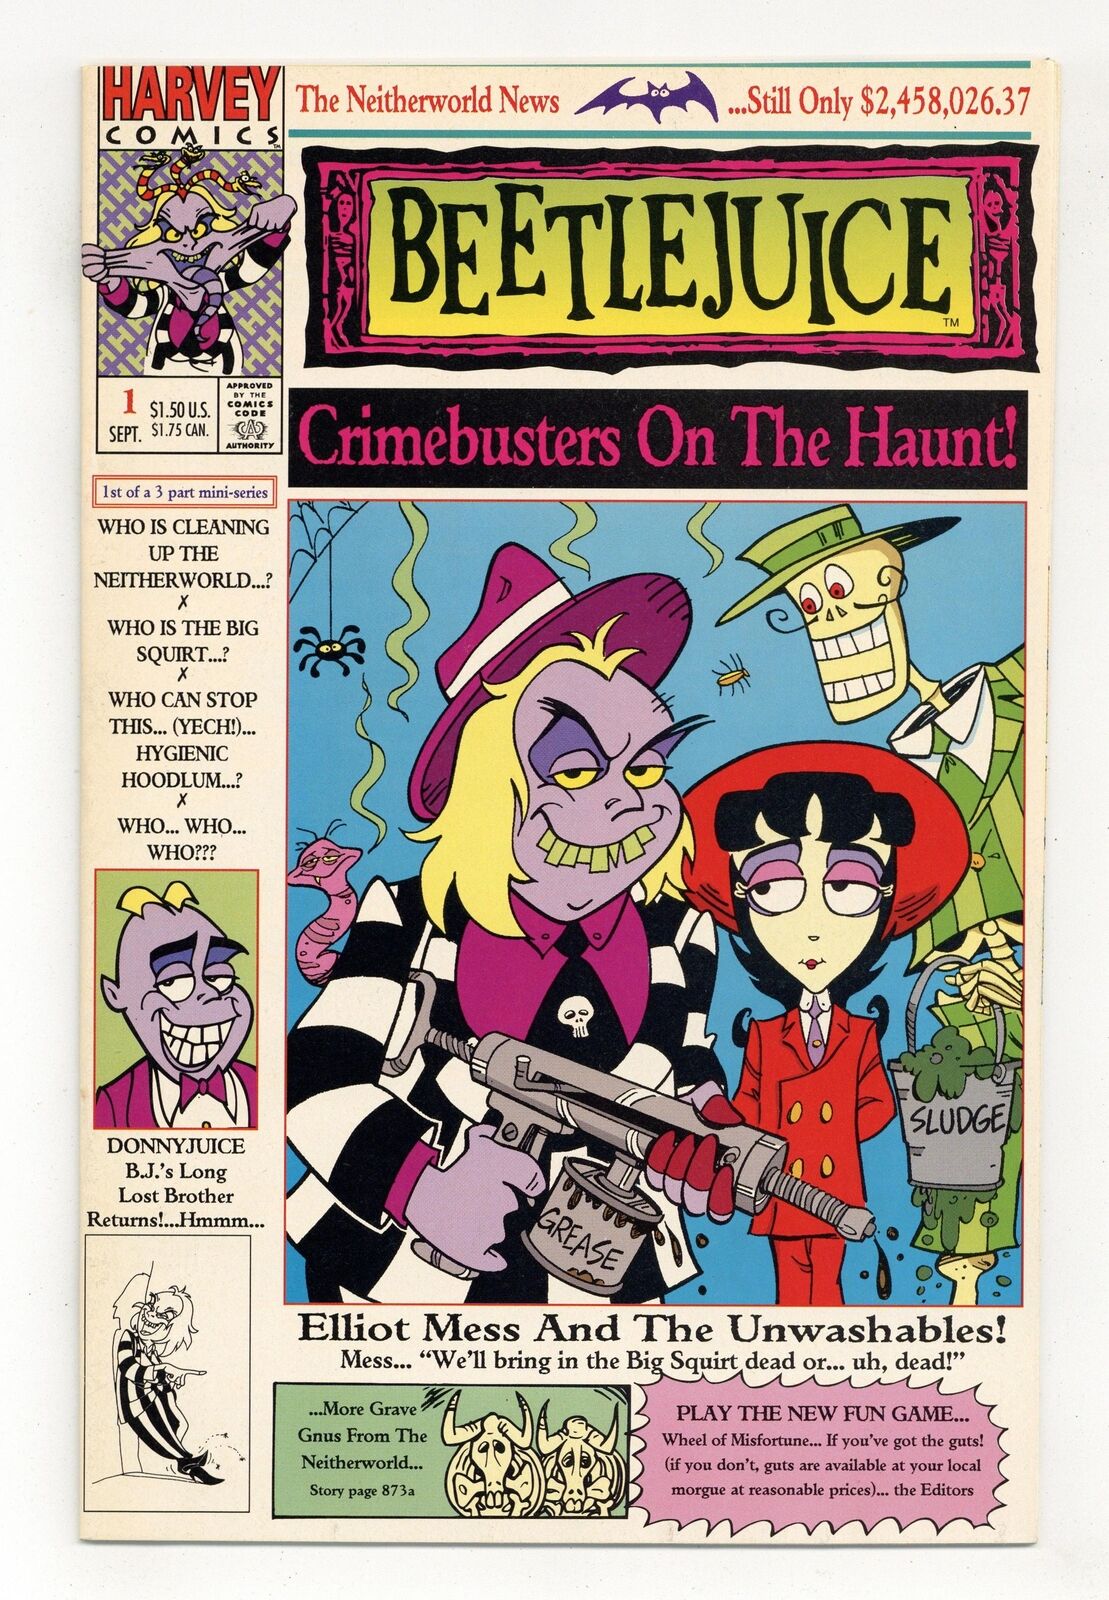 Beetlejuice Crimebusters on the Haunt #1 FN 6.0 1992